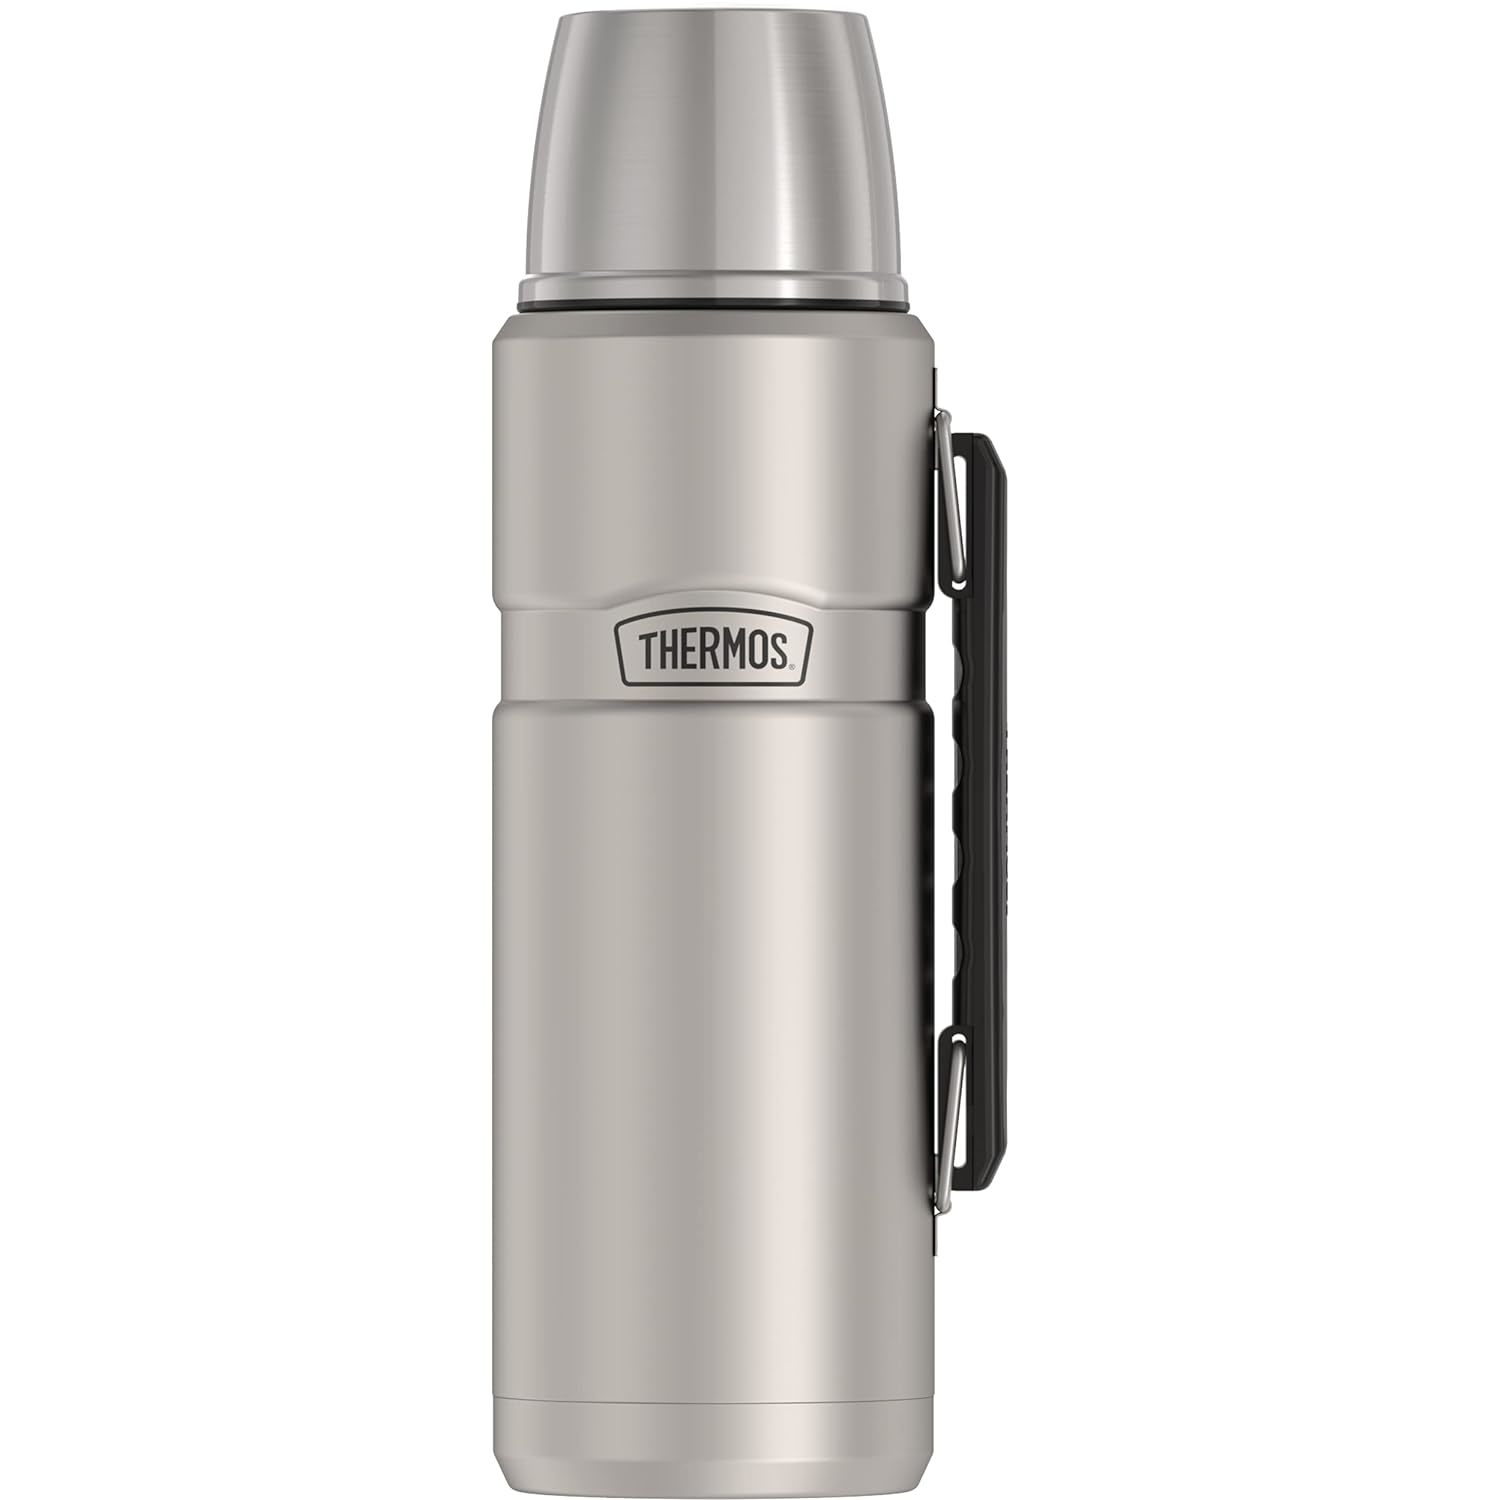 THERMOS Stainless King Vacuum-Insulated Beverage Bottle, 68 Ounce, Matte Steel - $76.99